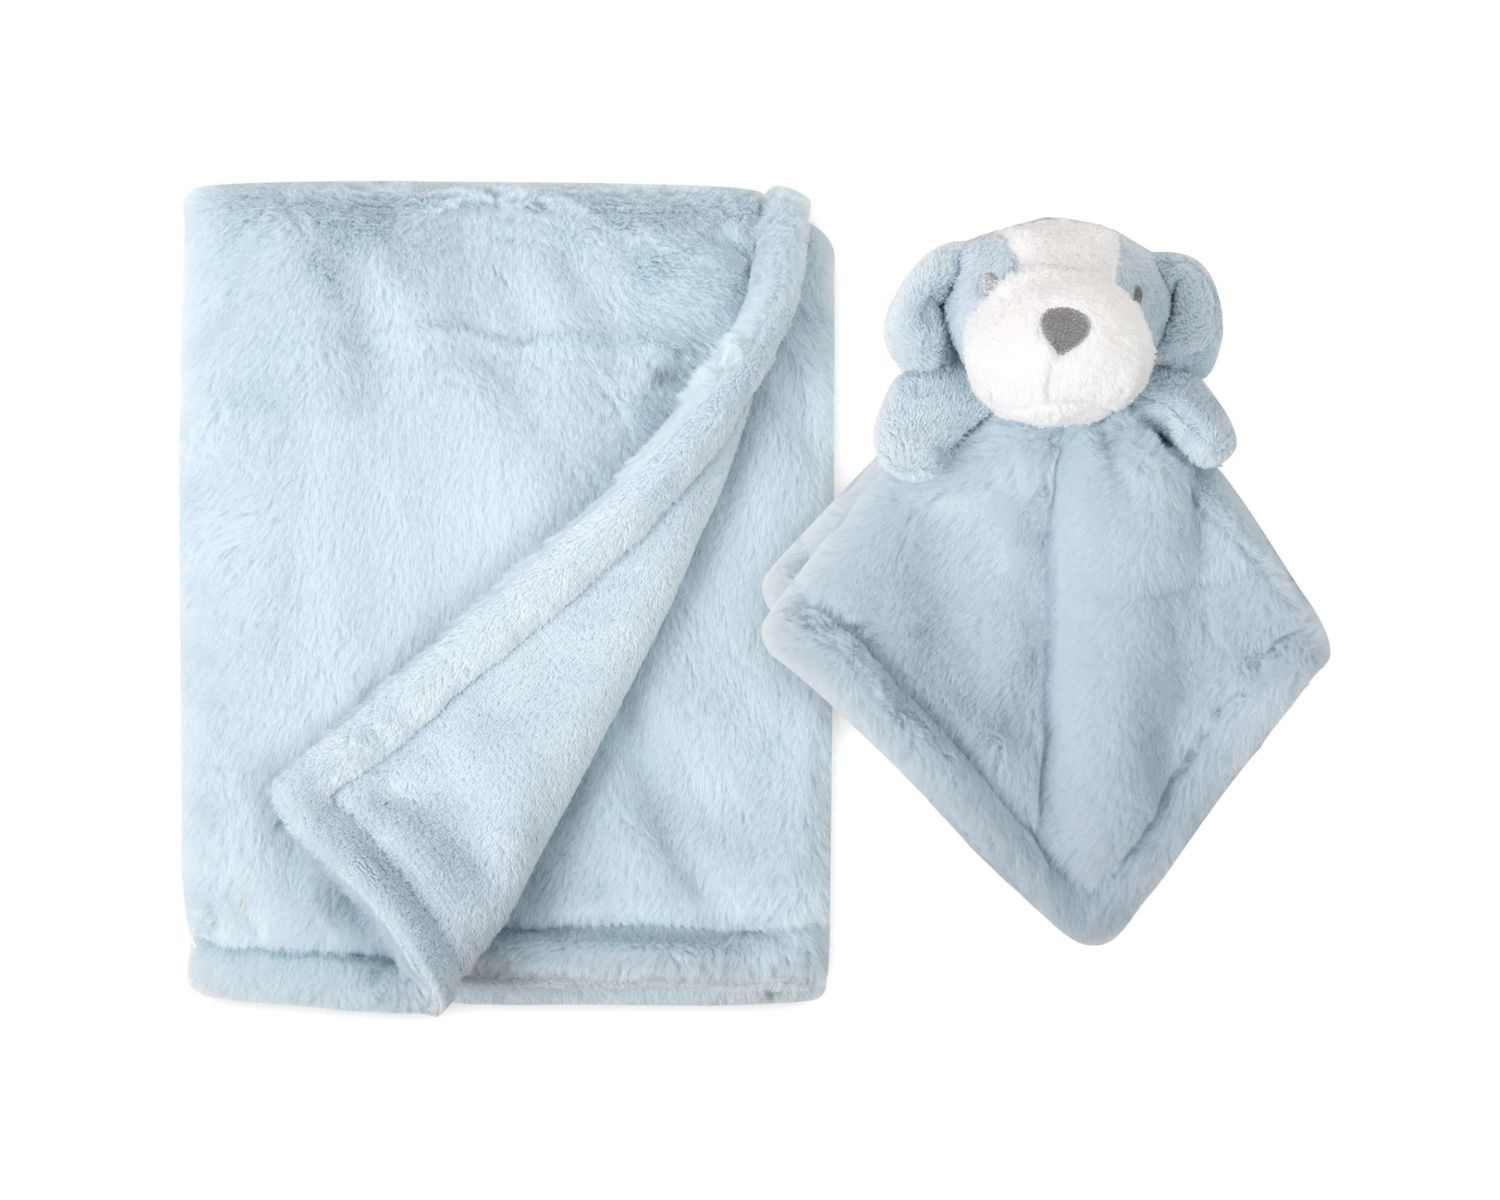 Review: Plush Baby Blanket – Soft and Cozy Must-Have